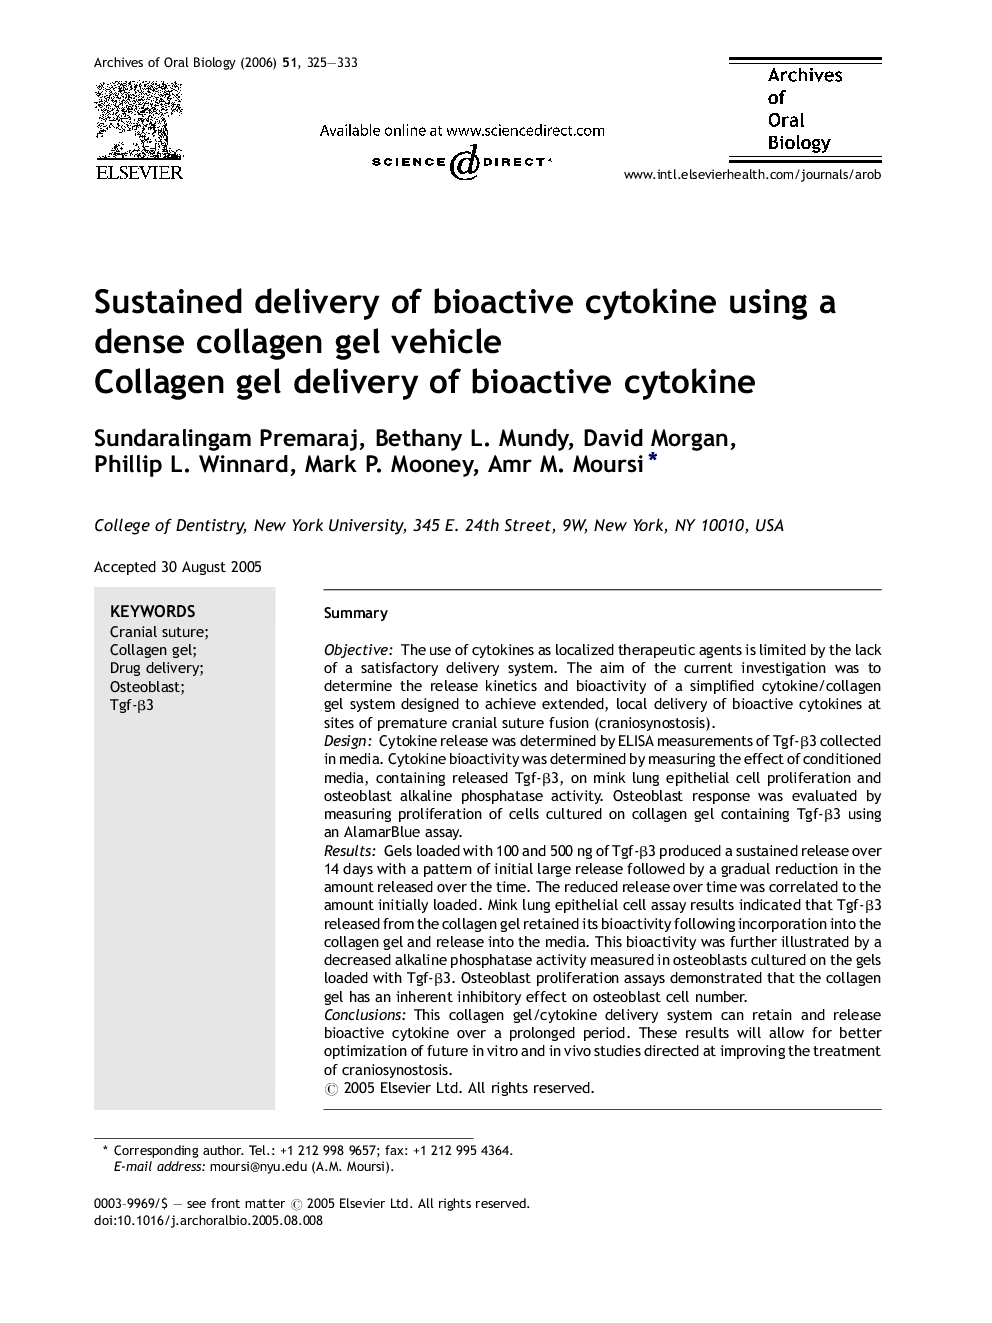 Sustained delivery of bioactive cytokine using a dense collagen gel vehicle